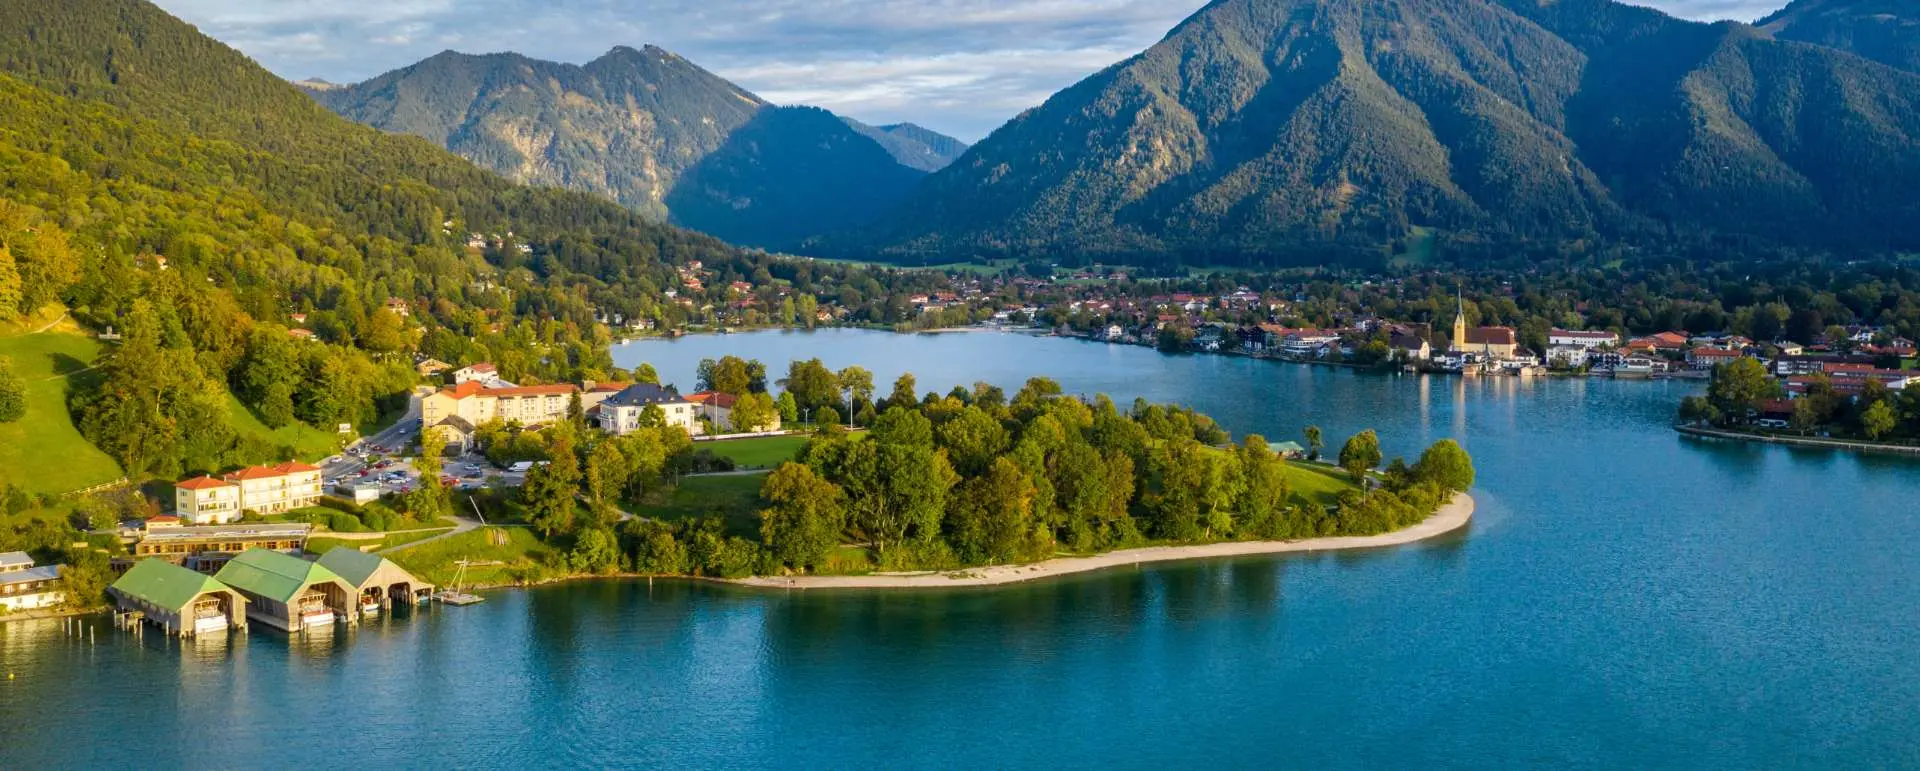 Tegernsee - Ideal accommodation for business trips